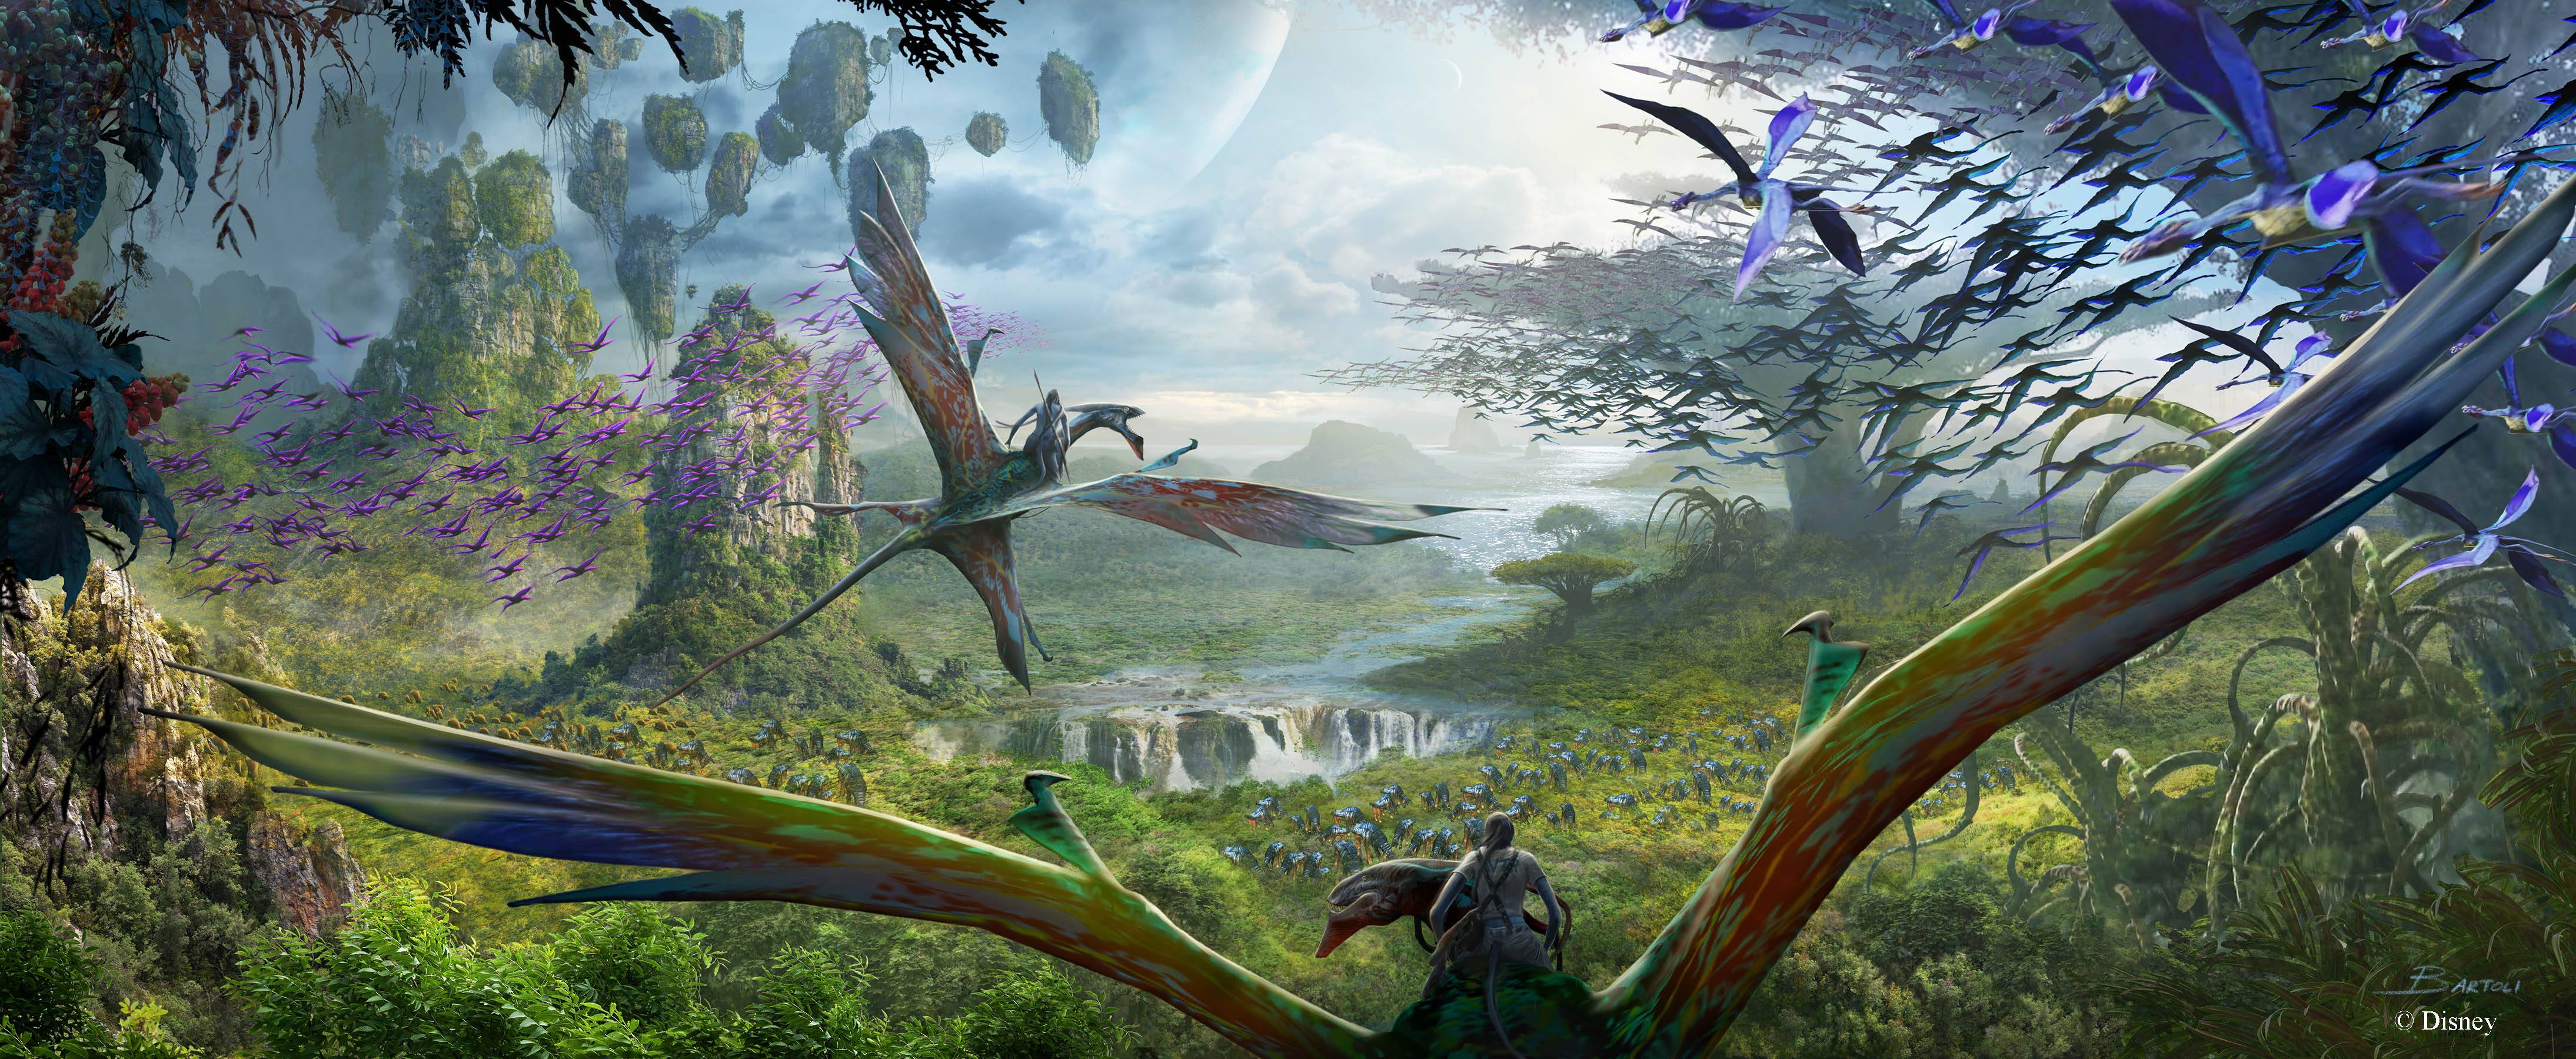 James Cameron has discussed with Bob Iger ideas to update Walt Disney World's Avatar Flight of Passage ride